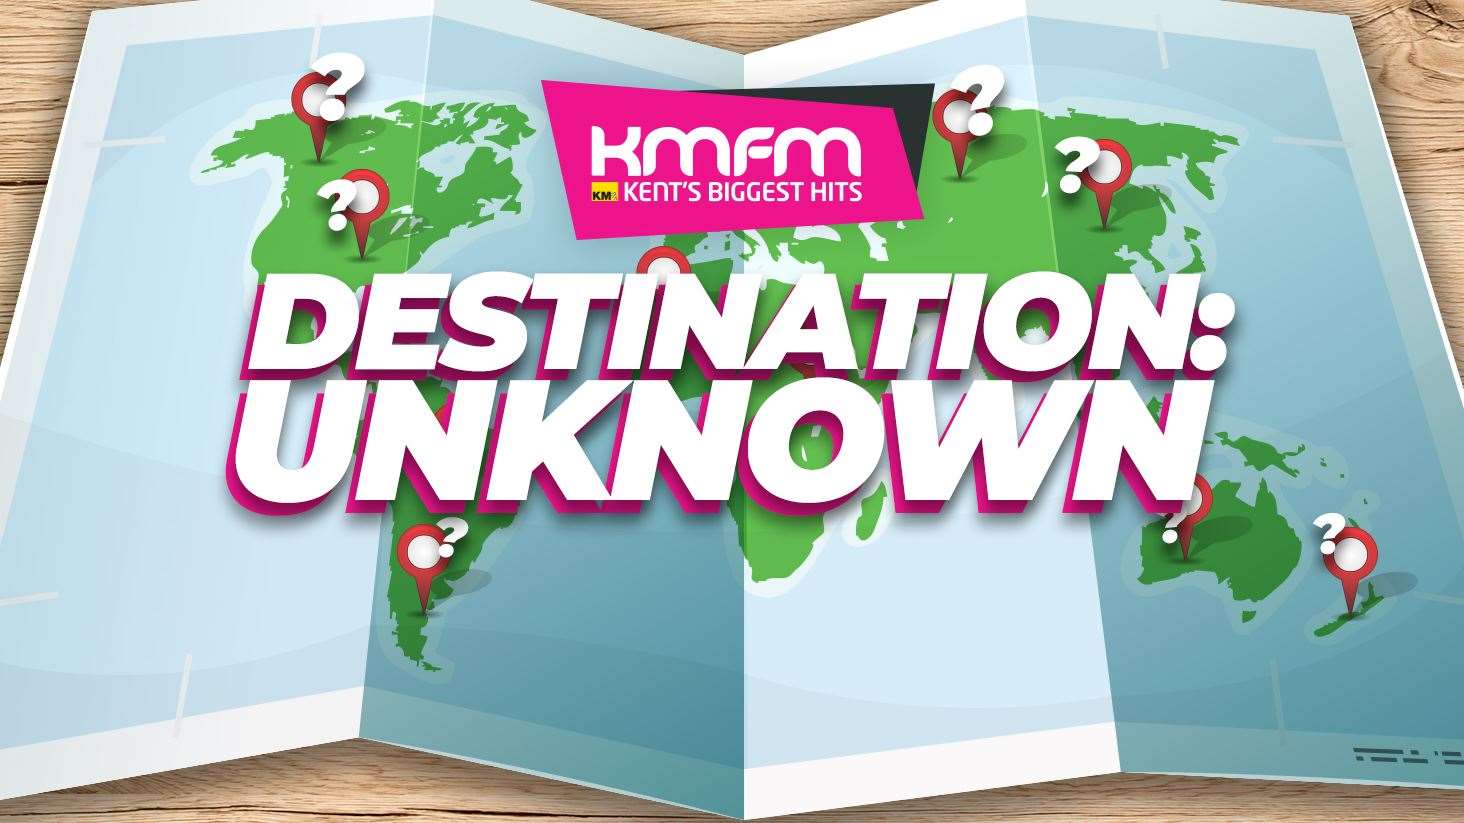 Chelsea Bennett has been named as the first winner of the kmfm 'Destination: Unknown' competition